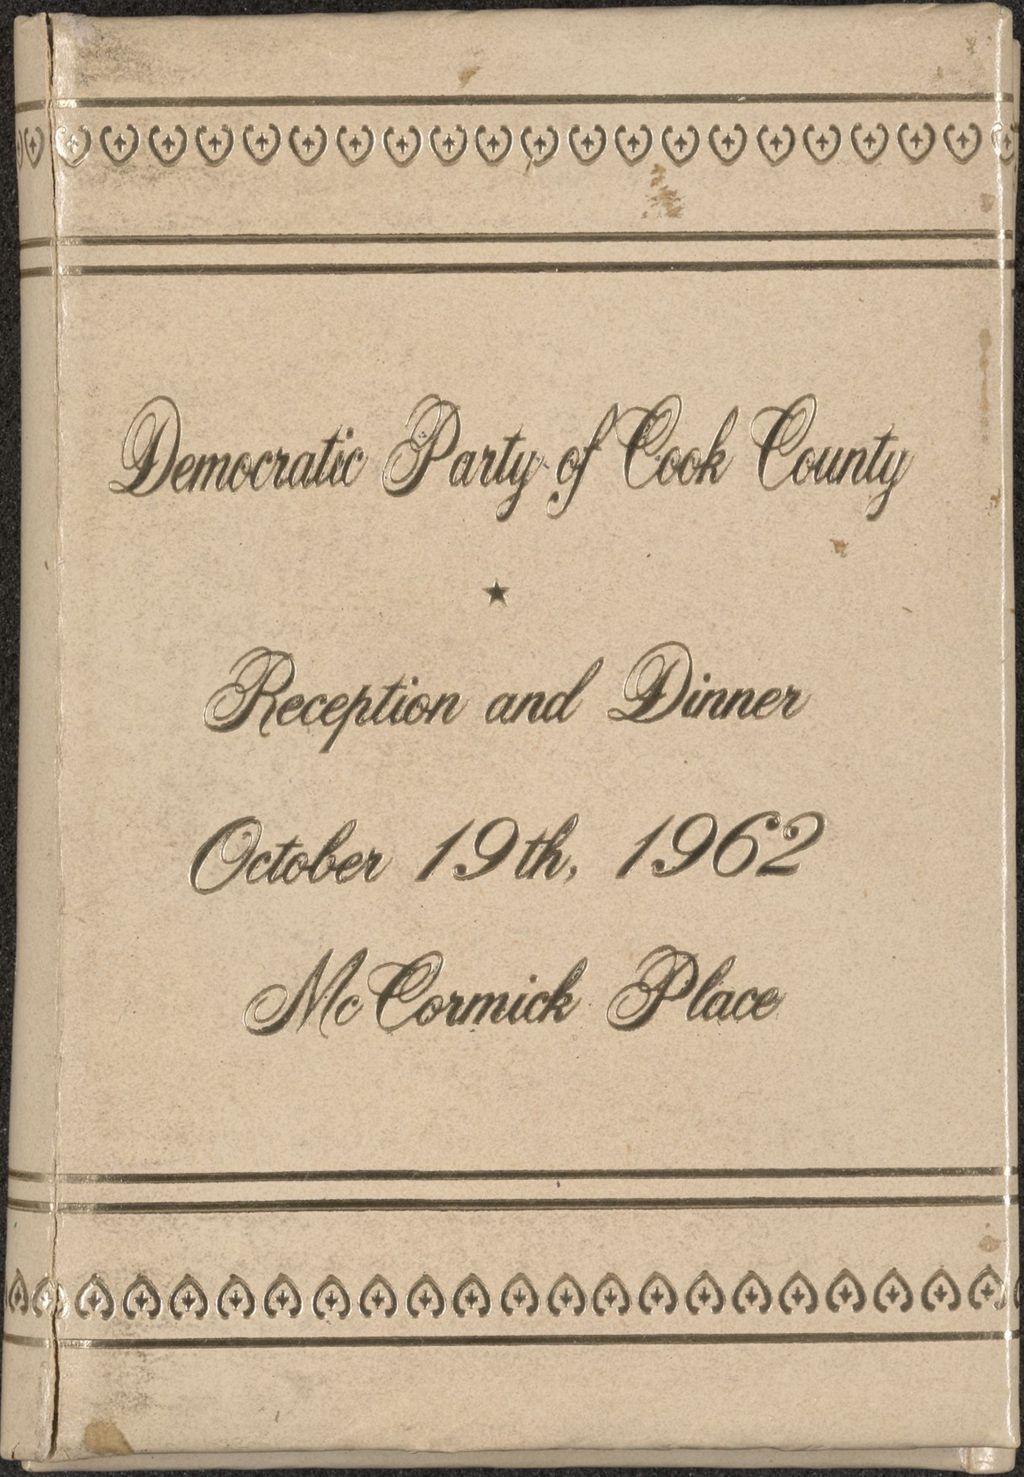 Democratic Party of Cook County Reception and Dinner photo album